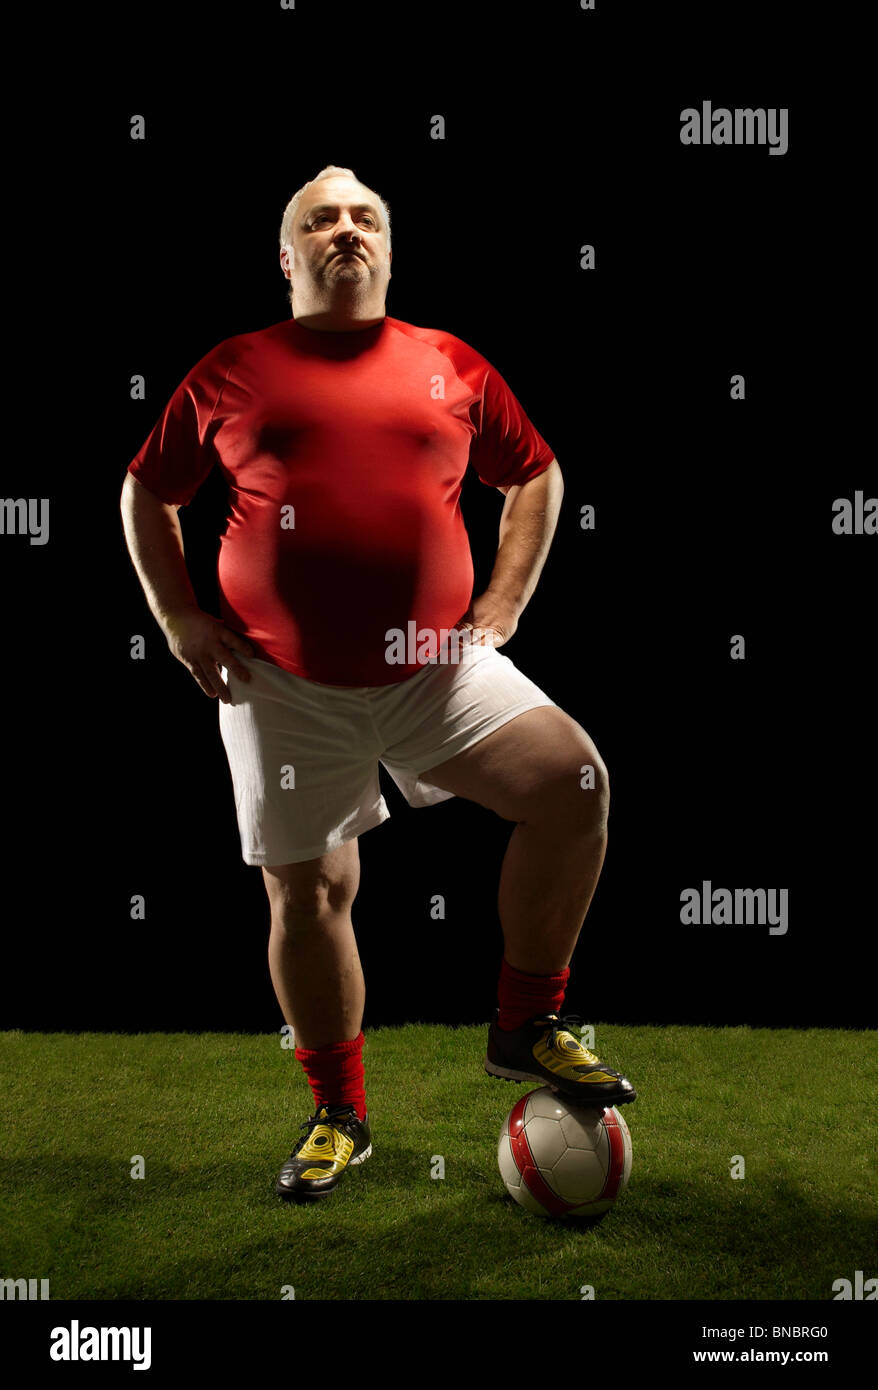 Large sportsman with foot on football Stock Photo